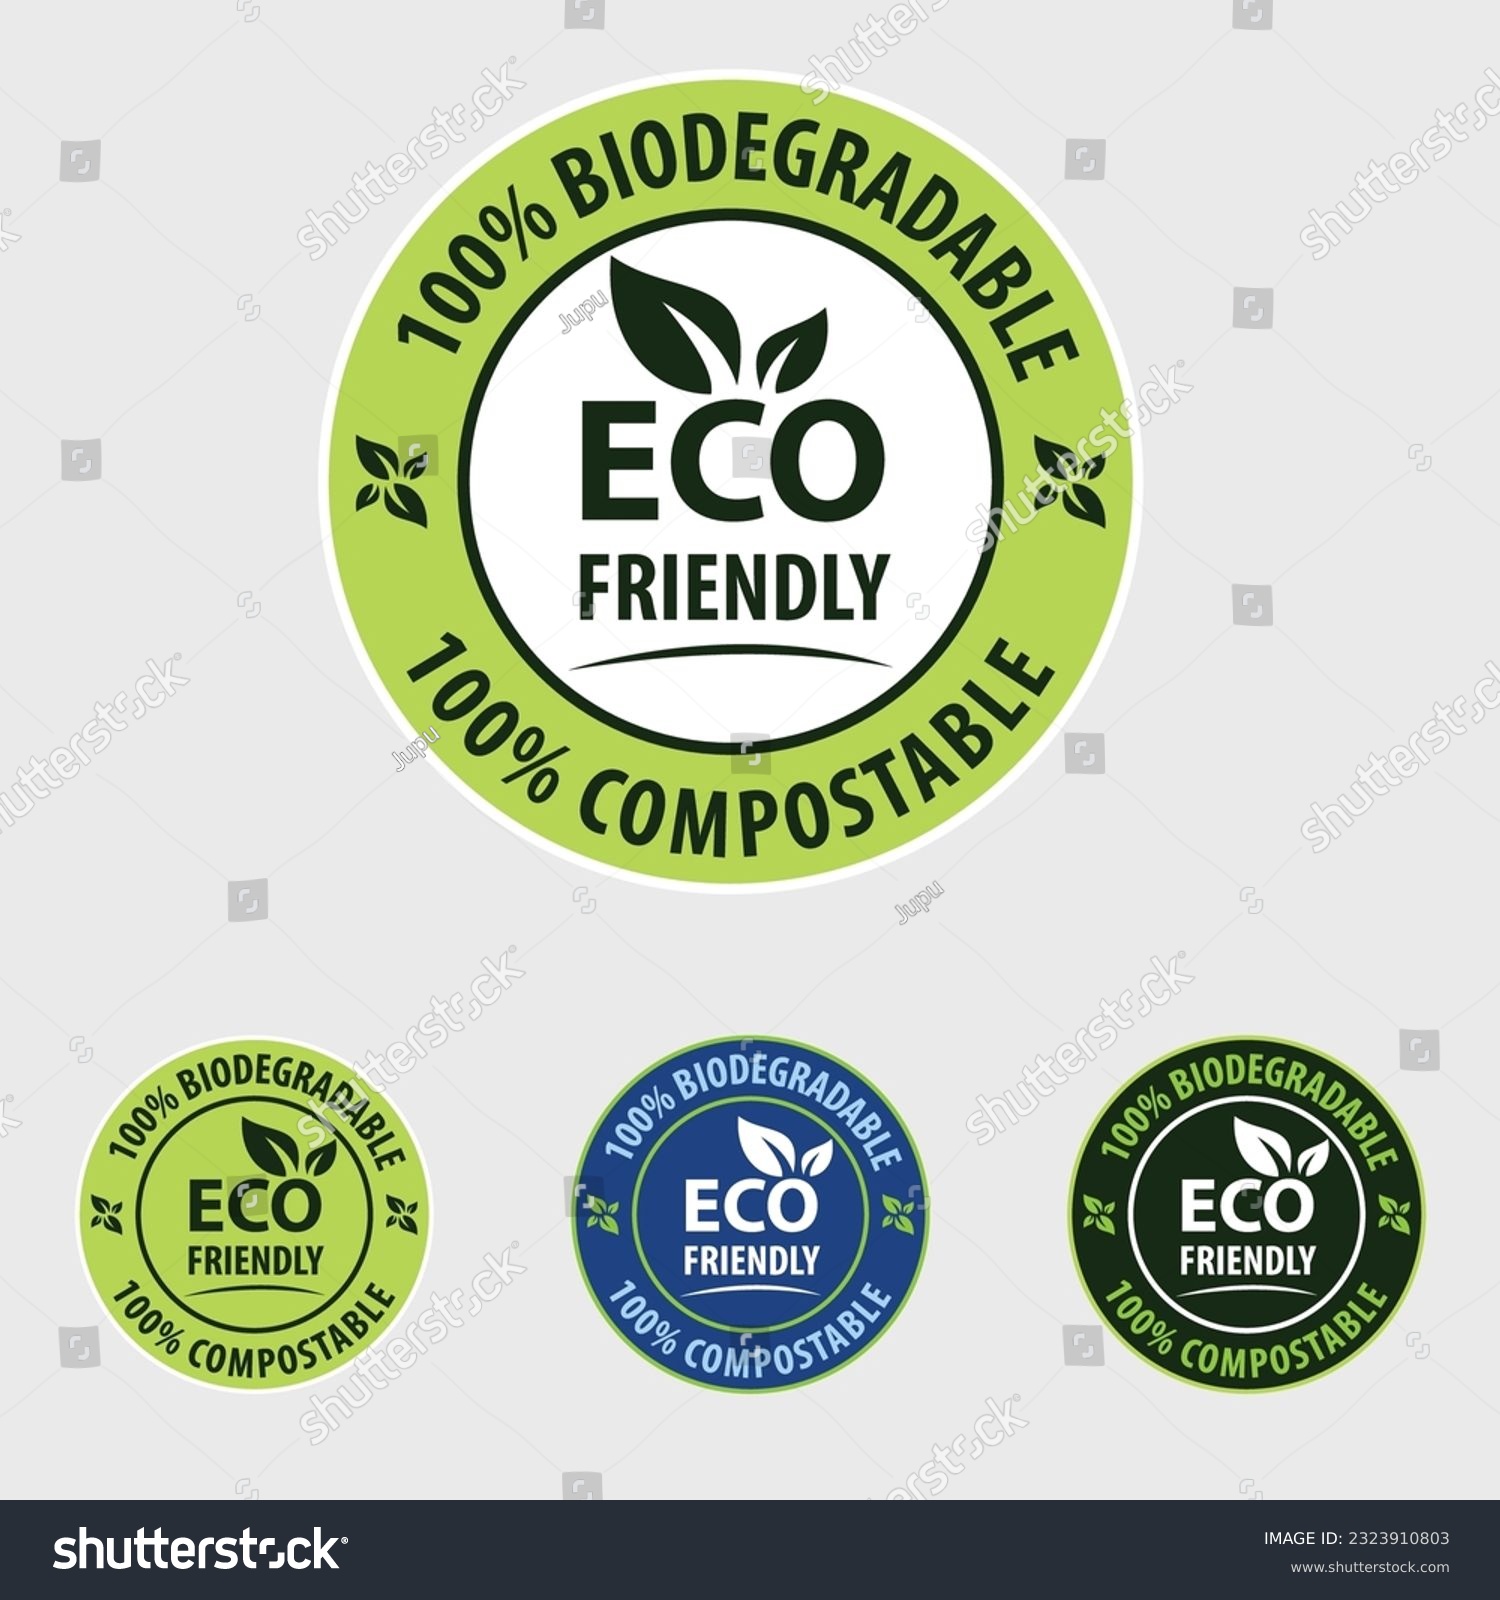 SVG of Eco Friendly Icon, 100% Biodegradeable, 100% Compostable, Eco Icon, pictogram, Symbol, sign, logo, badge, emble, isolated graphic vector, flat illustration, Icon For packaing, environment friendly.  svg